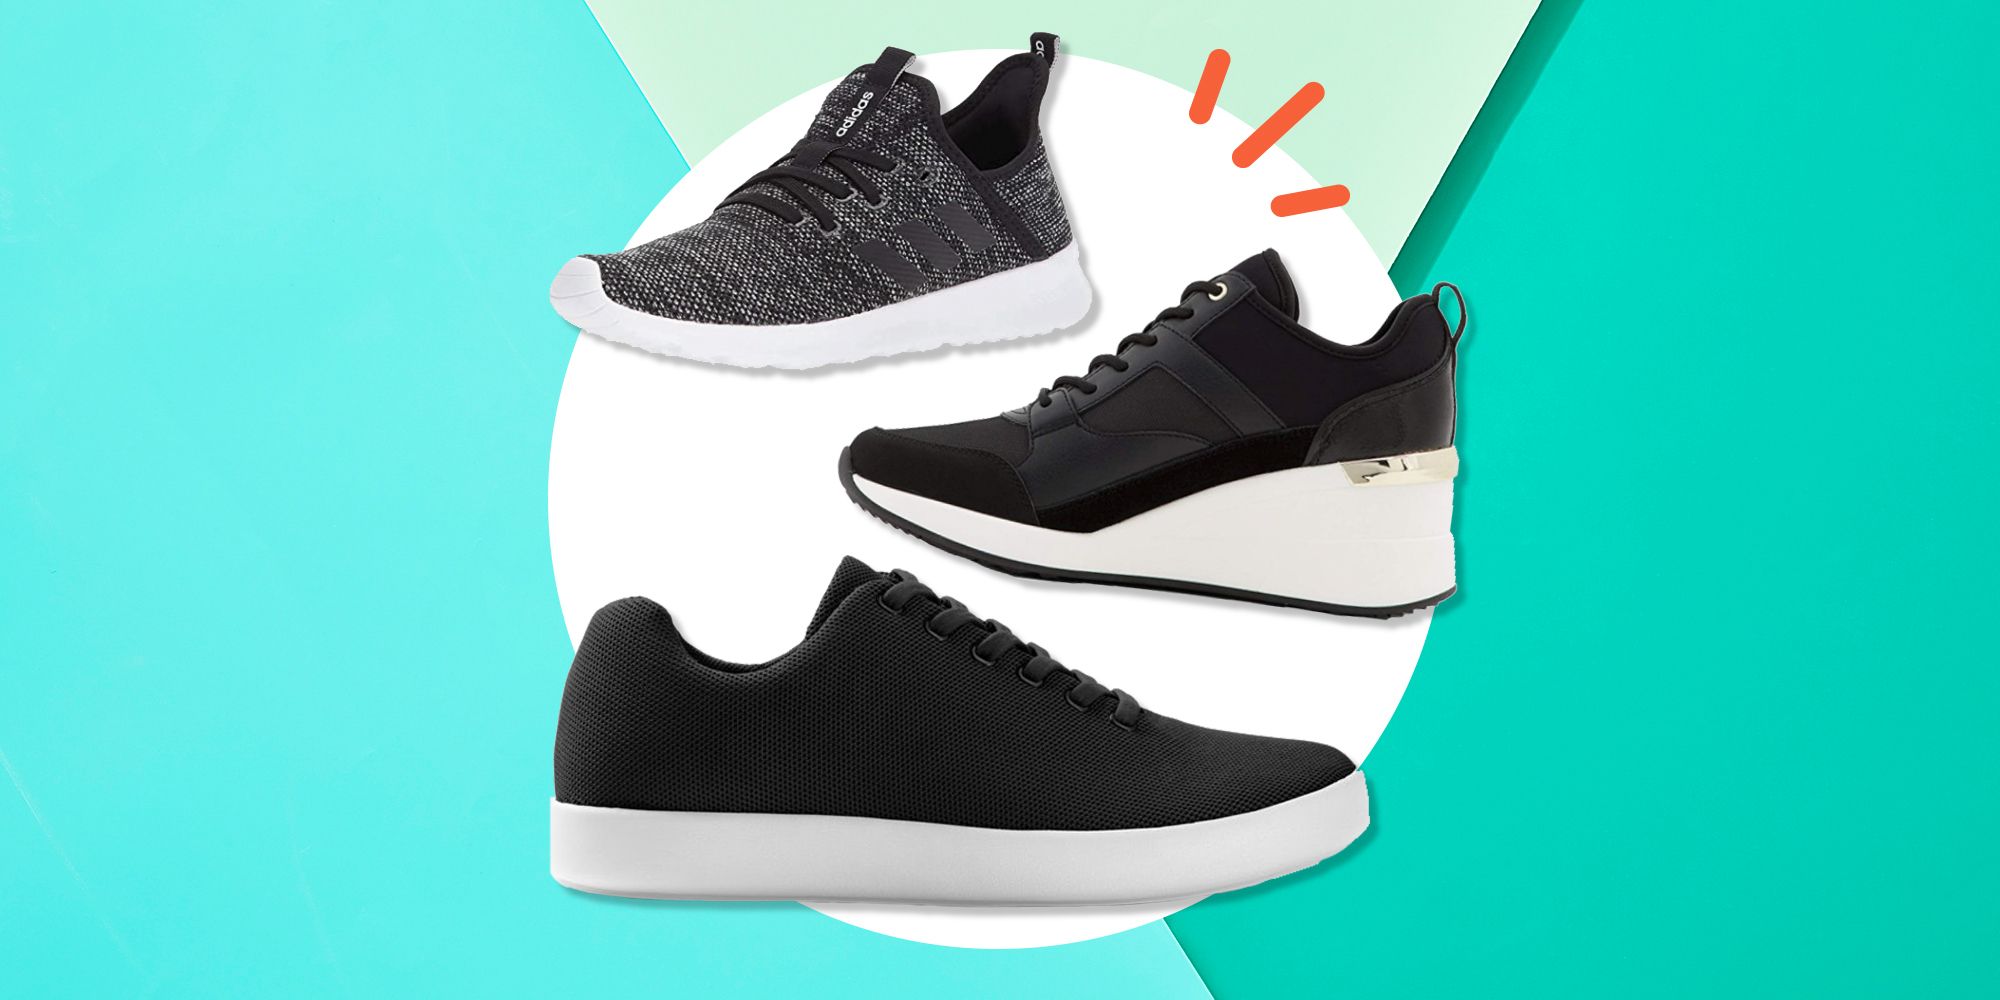 Back to Black: The 6 Best Black Sneakers for Women! (2021)